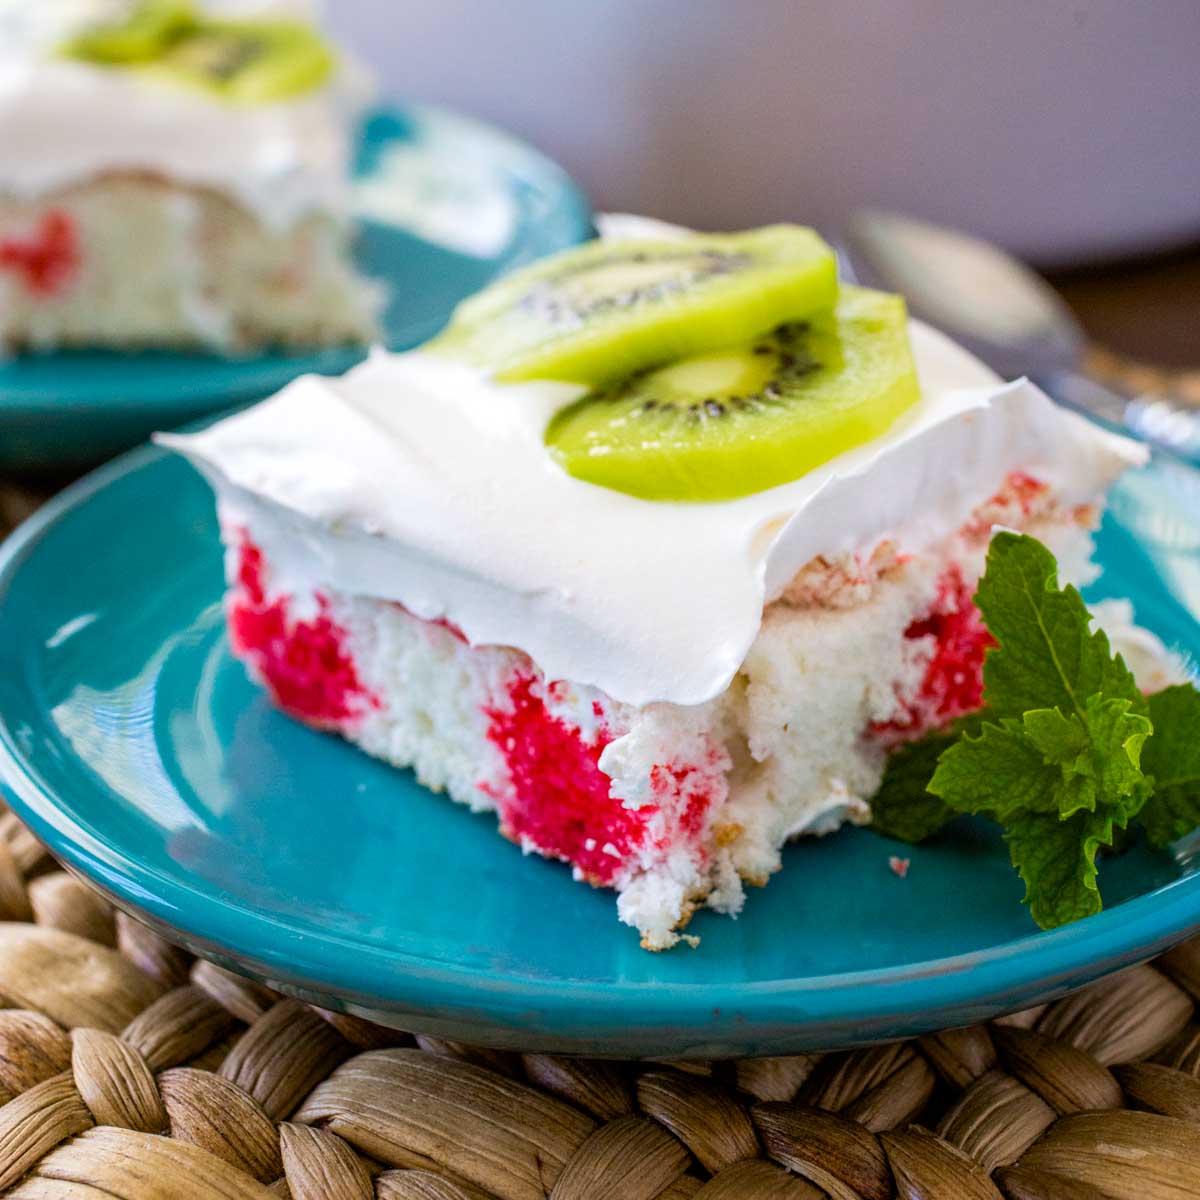 A square slice of strawberry kiwi cake shows the red Jello poke stripes, fluffy whipped topping, and has two thin slices of fresh kiwi on top for garnish.